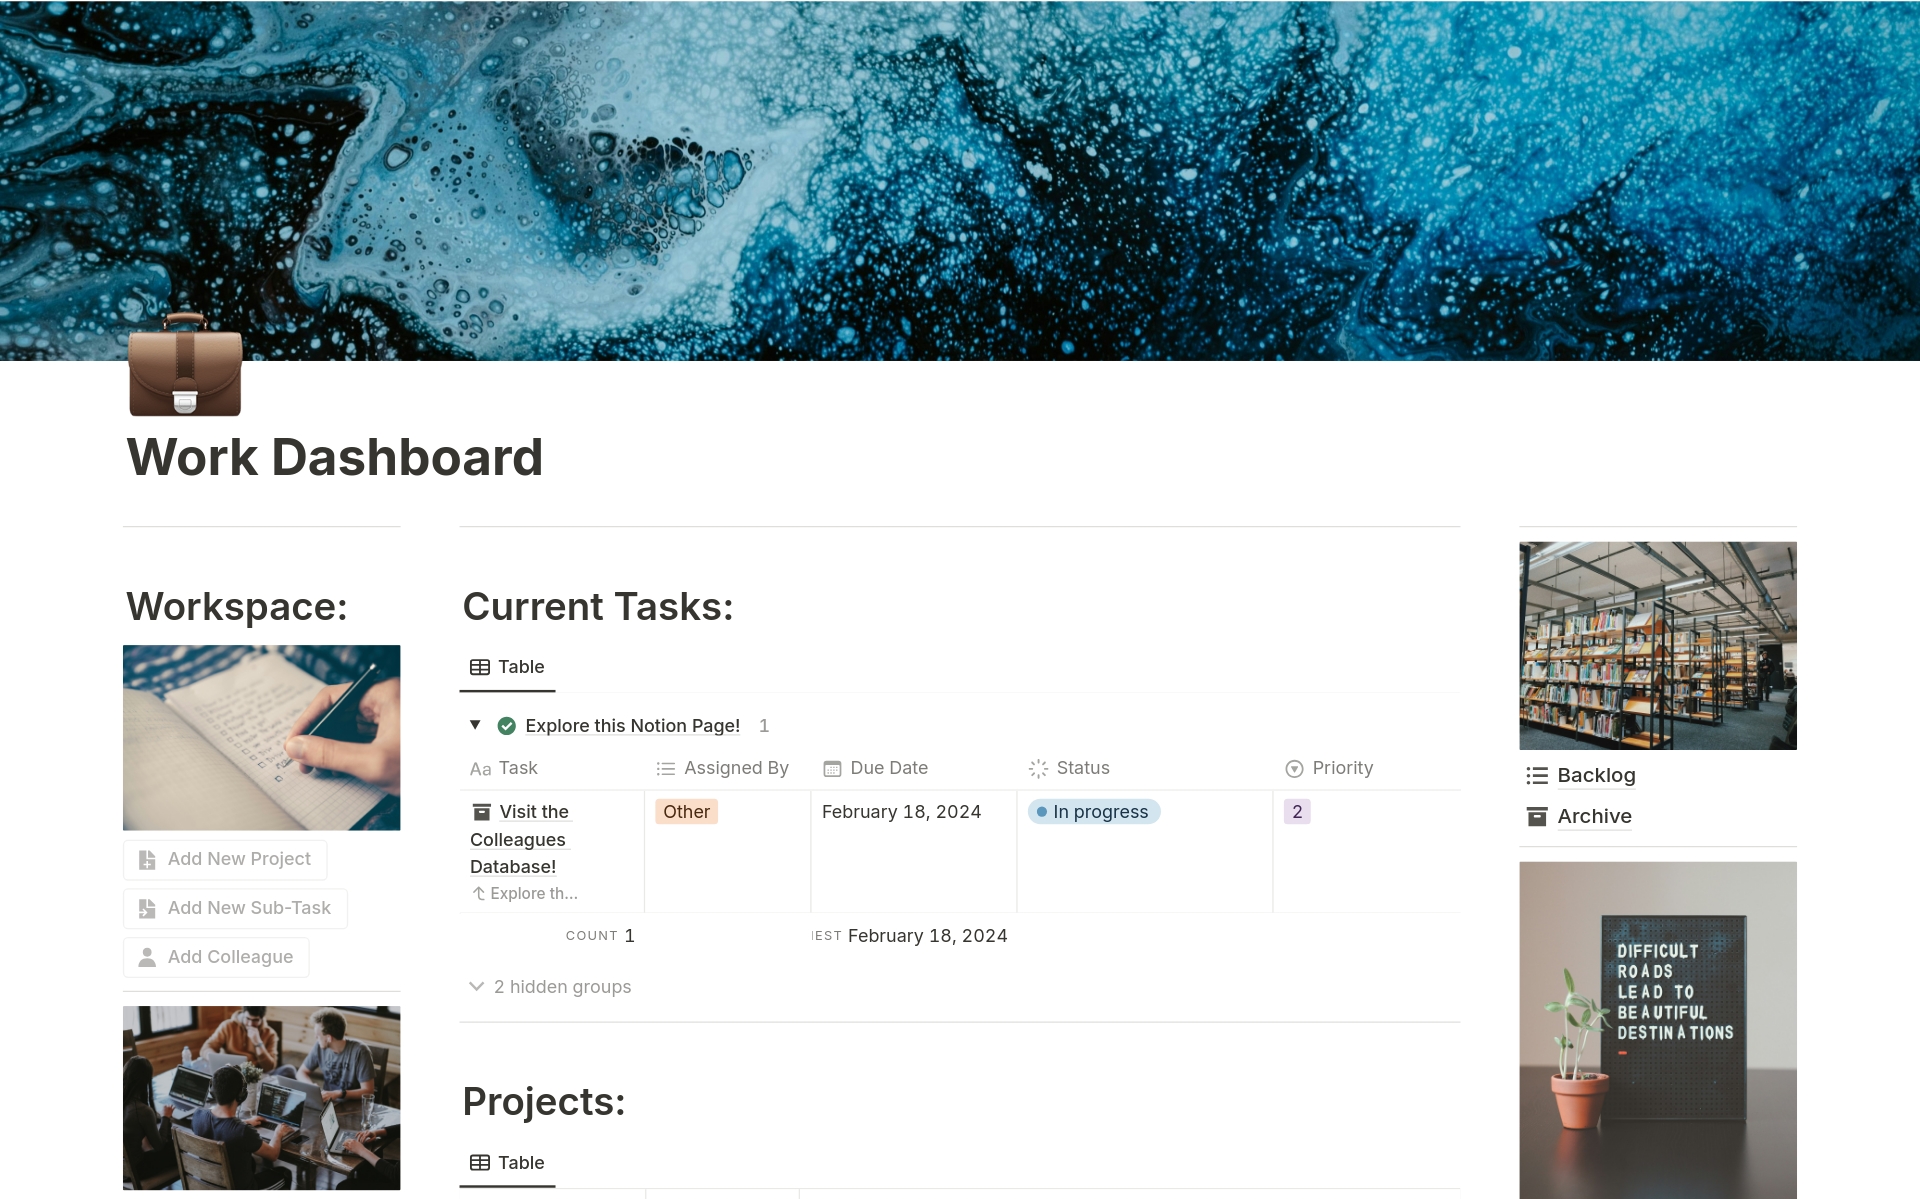 The ultimate work or student dashboard that fulfils all your organisational needs and make you ready for any future challenge! (Includes: Dashboard Overview, Backlog, Archive, Colleague Database, Work Procedures, Quick Notes, Useful Links and Personal Progression).